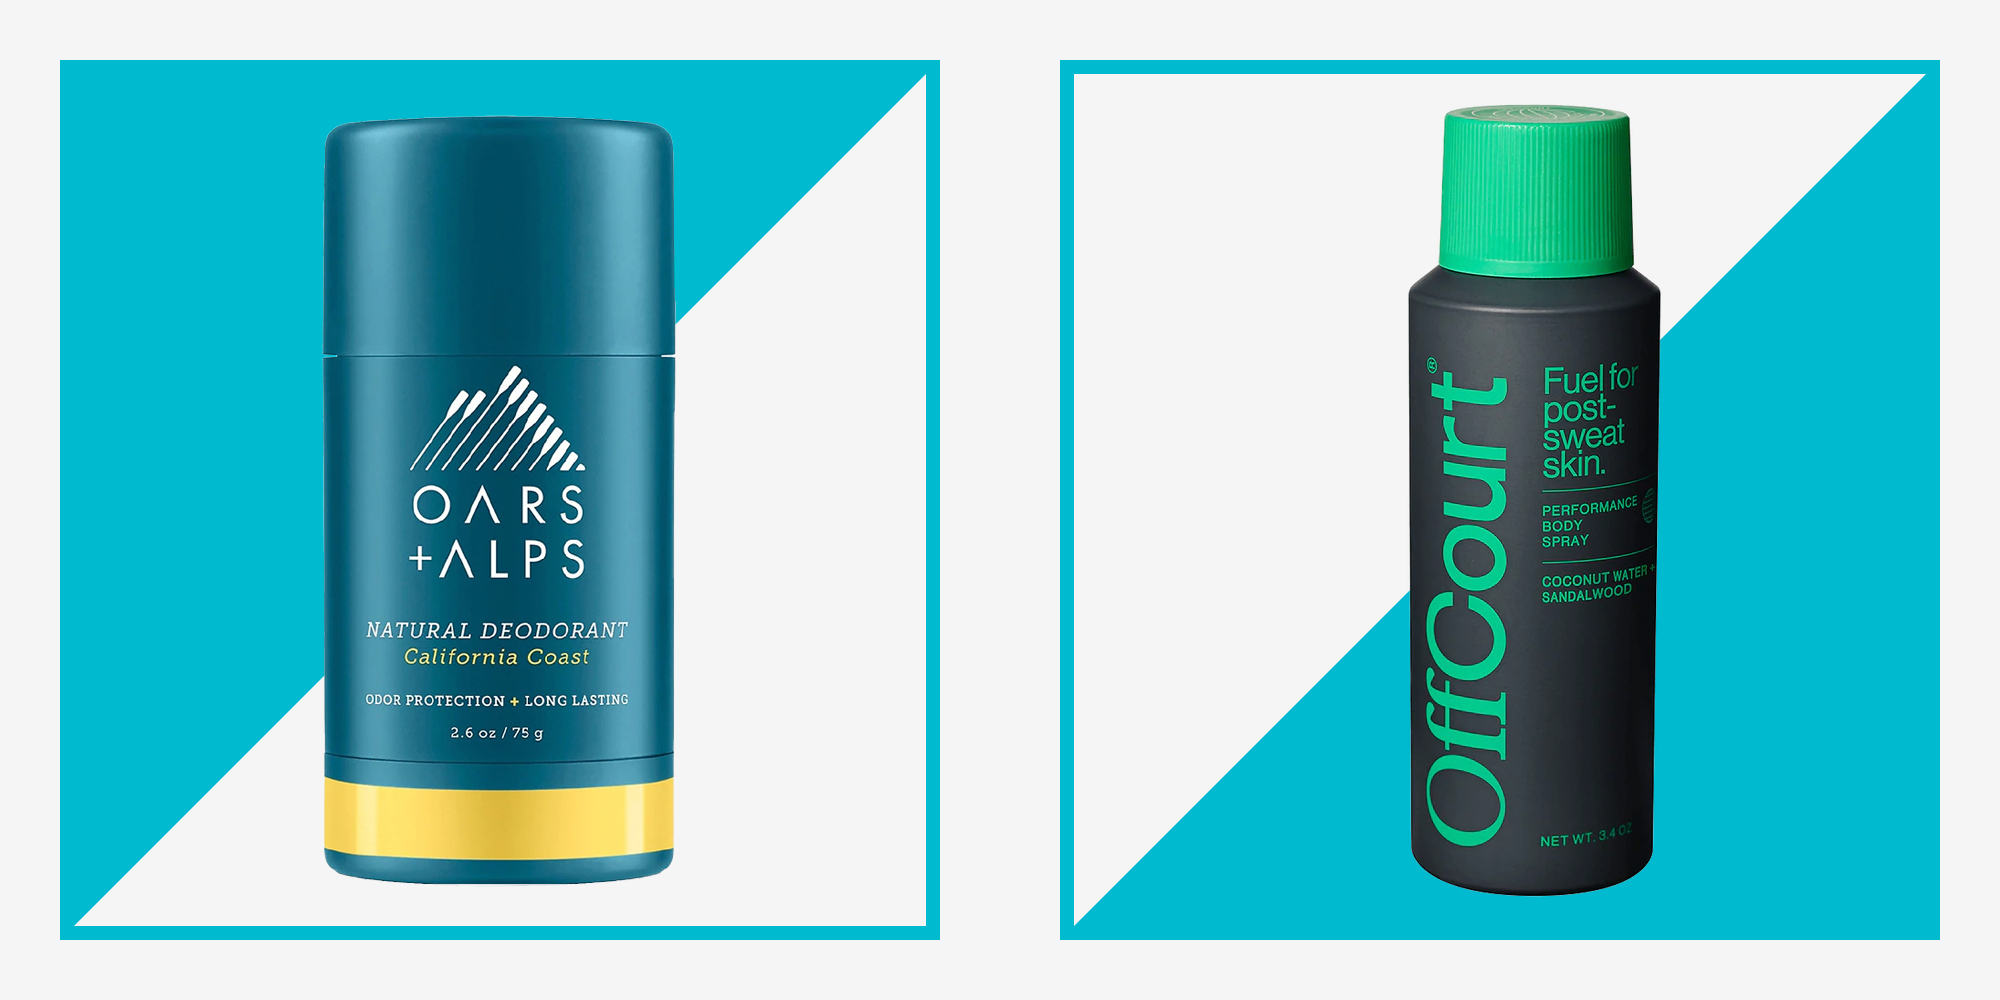 19 Best Deodorants For Men Tested by Grooming Experts